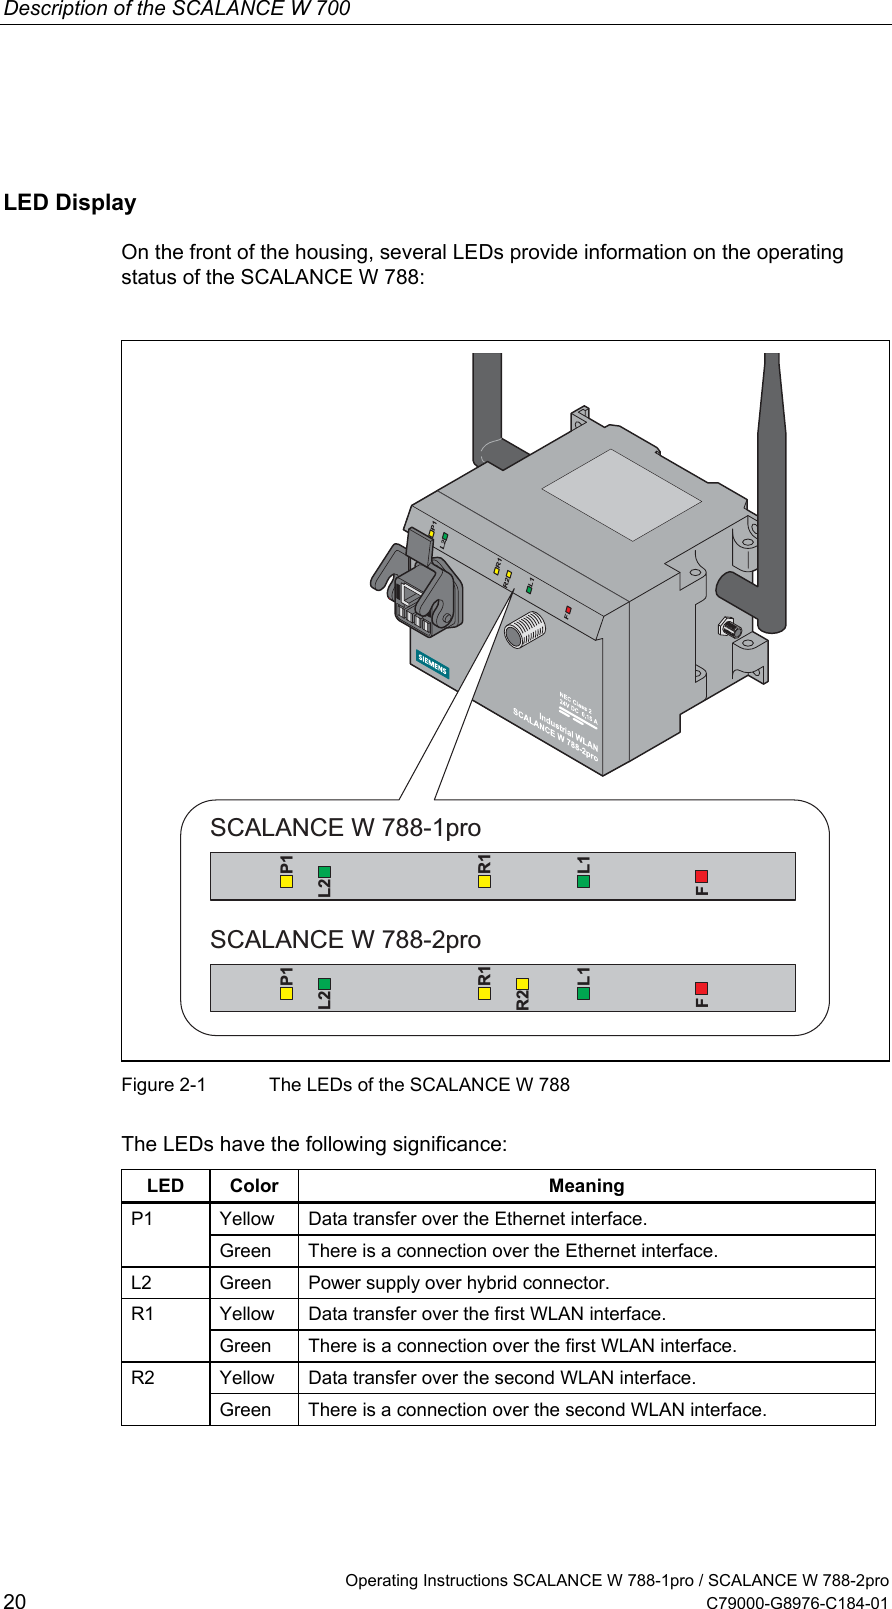 Description of the SCALANCE W 700  LED Display On the front of the housing, several LEDs provide information on the operating status of the SCALANCE W 788:  P 1L 2R 1R 2L 1FP 1L 2R 1L 1FS C A L A N C E   W   7 8 8 - 1 p r oS C A L A N C E   W   7 8 8 - 2 p r o Figure 2-1  The LEDs of the SCALANCE W 788  The LEDs have the following significance:  LED Color  Meaning   Yellow  Data transfer over the Ethernet interface.  P1 Green  There is a connection over the Ethernet interface.   L2  Green  Power supply over hybrid connector.   Yellow  Data transfer over the first WLAN interface.  R1 Green  There is a connection over the first WLAN interface.   Yellow  Data transfer over the second WLAN interface.  R2 Green  There is a connection over the second WLAN interface.   Operating Instructions SCALANCE W 788-1pro / SCALANCE W 788-2pro 20  C79000-G8976-C184-01 